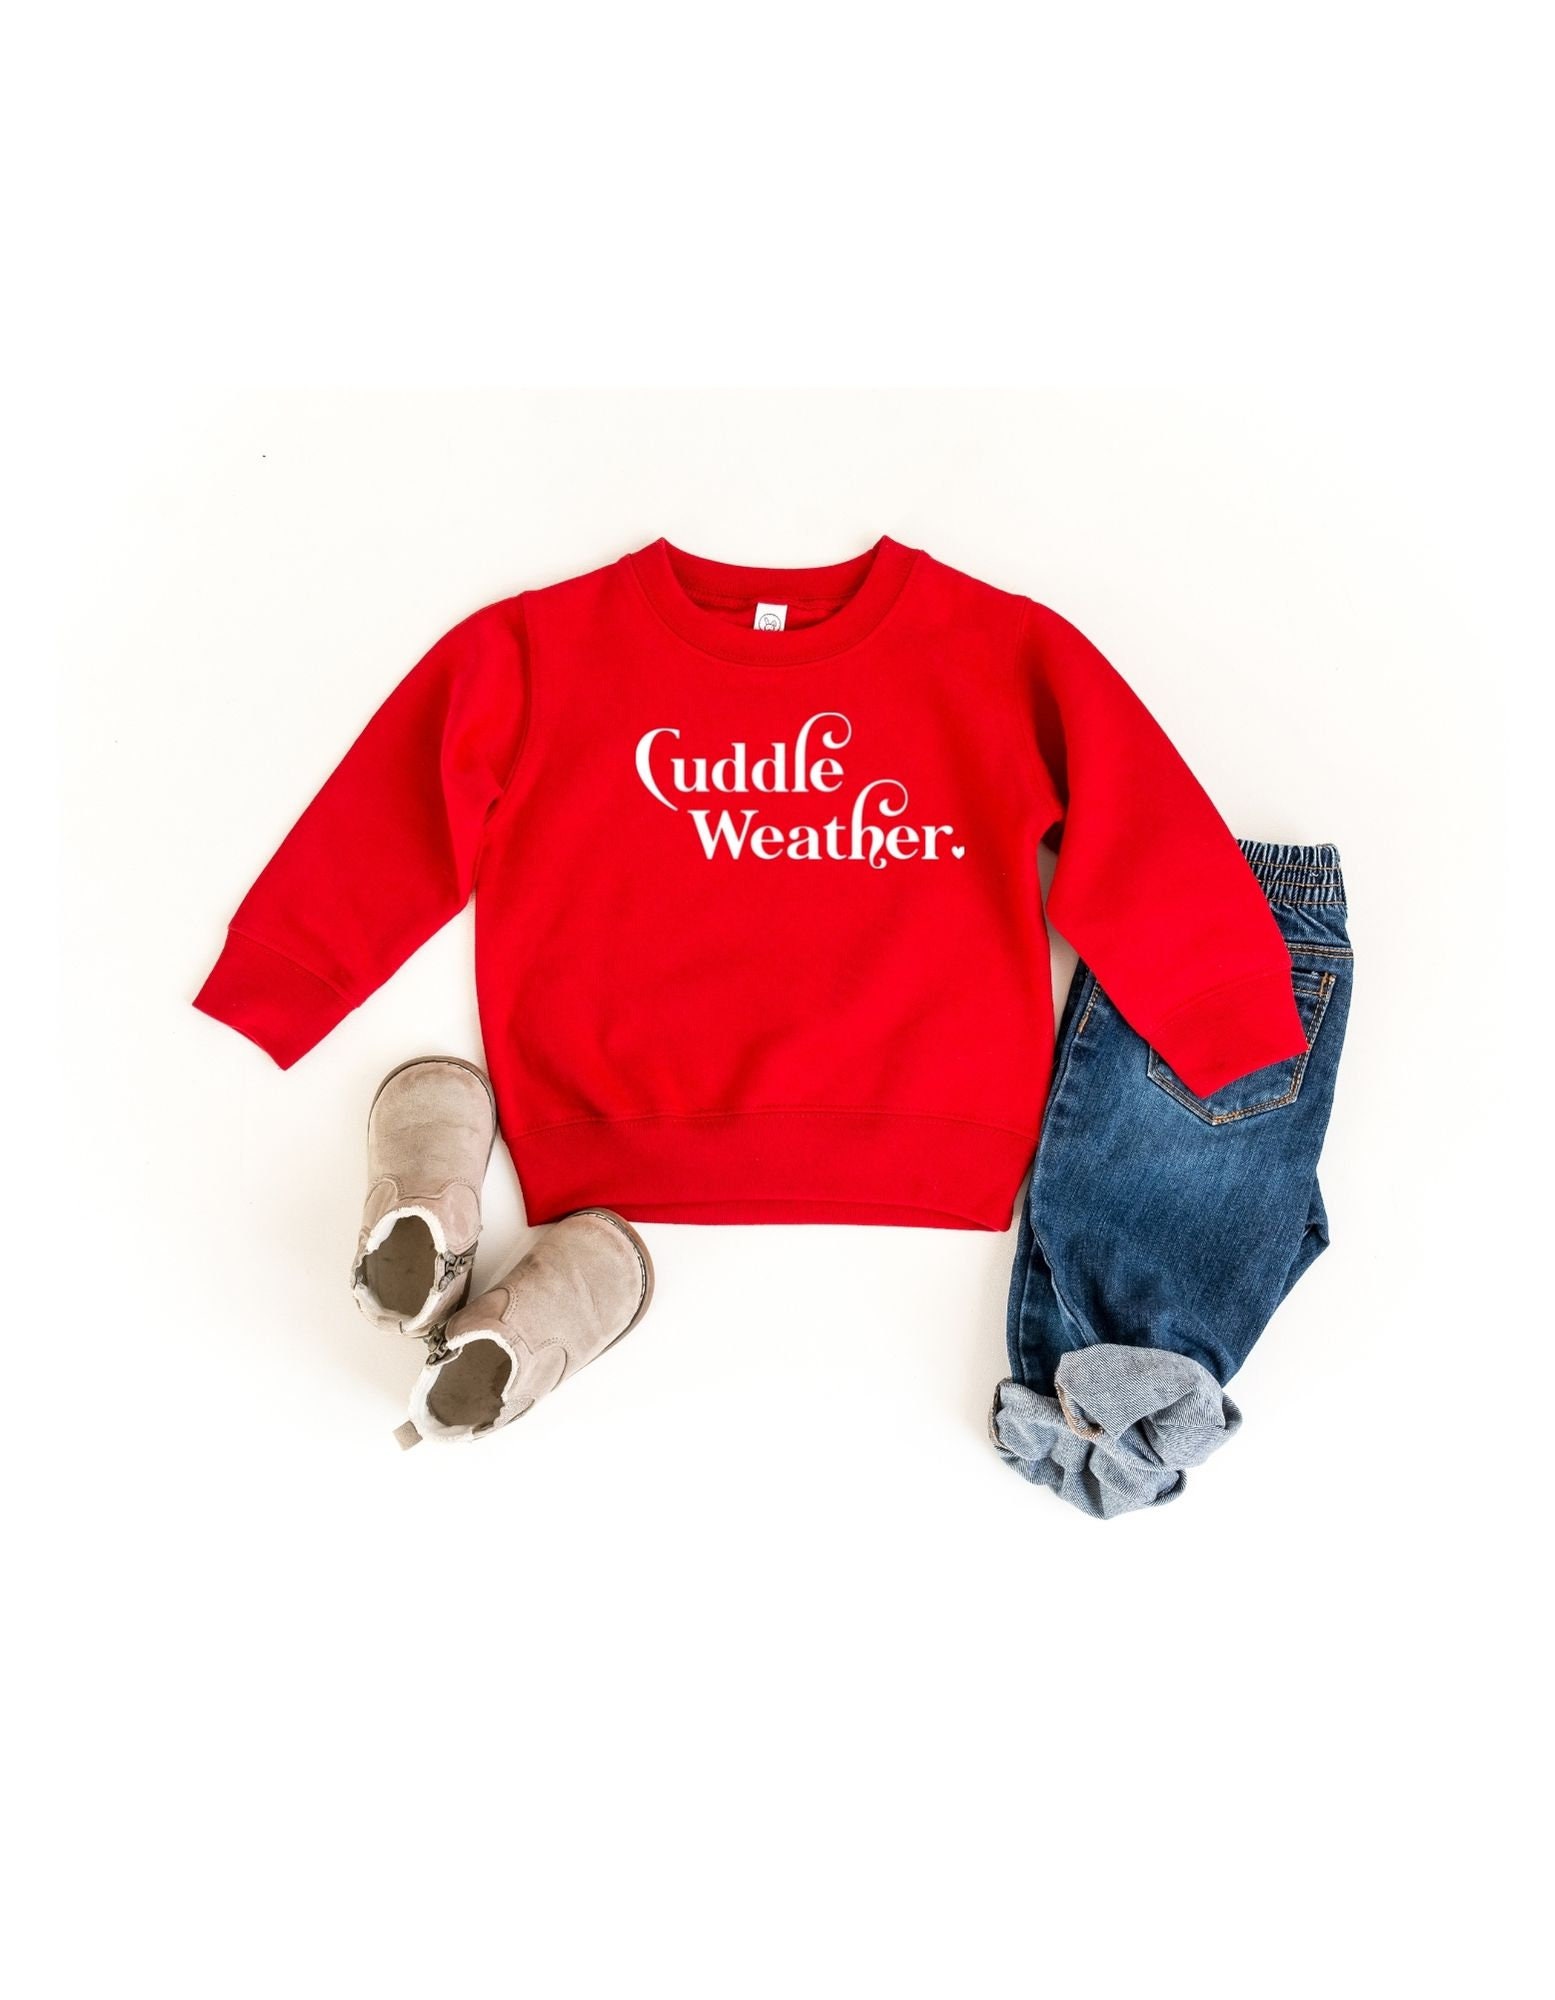 Cuddle Weather Cozy Sweatshirt, Cute Sweatshirts for Girls, Valentines Gift  for Toddler Girl, Gender Neutral Toddler Clothes, 3 Year Old 